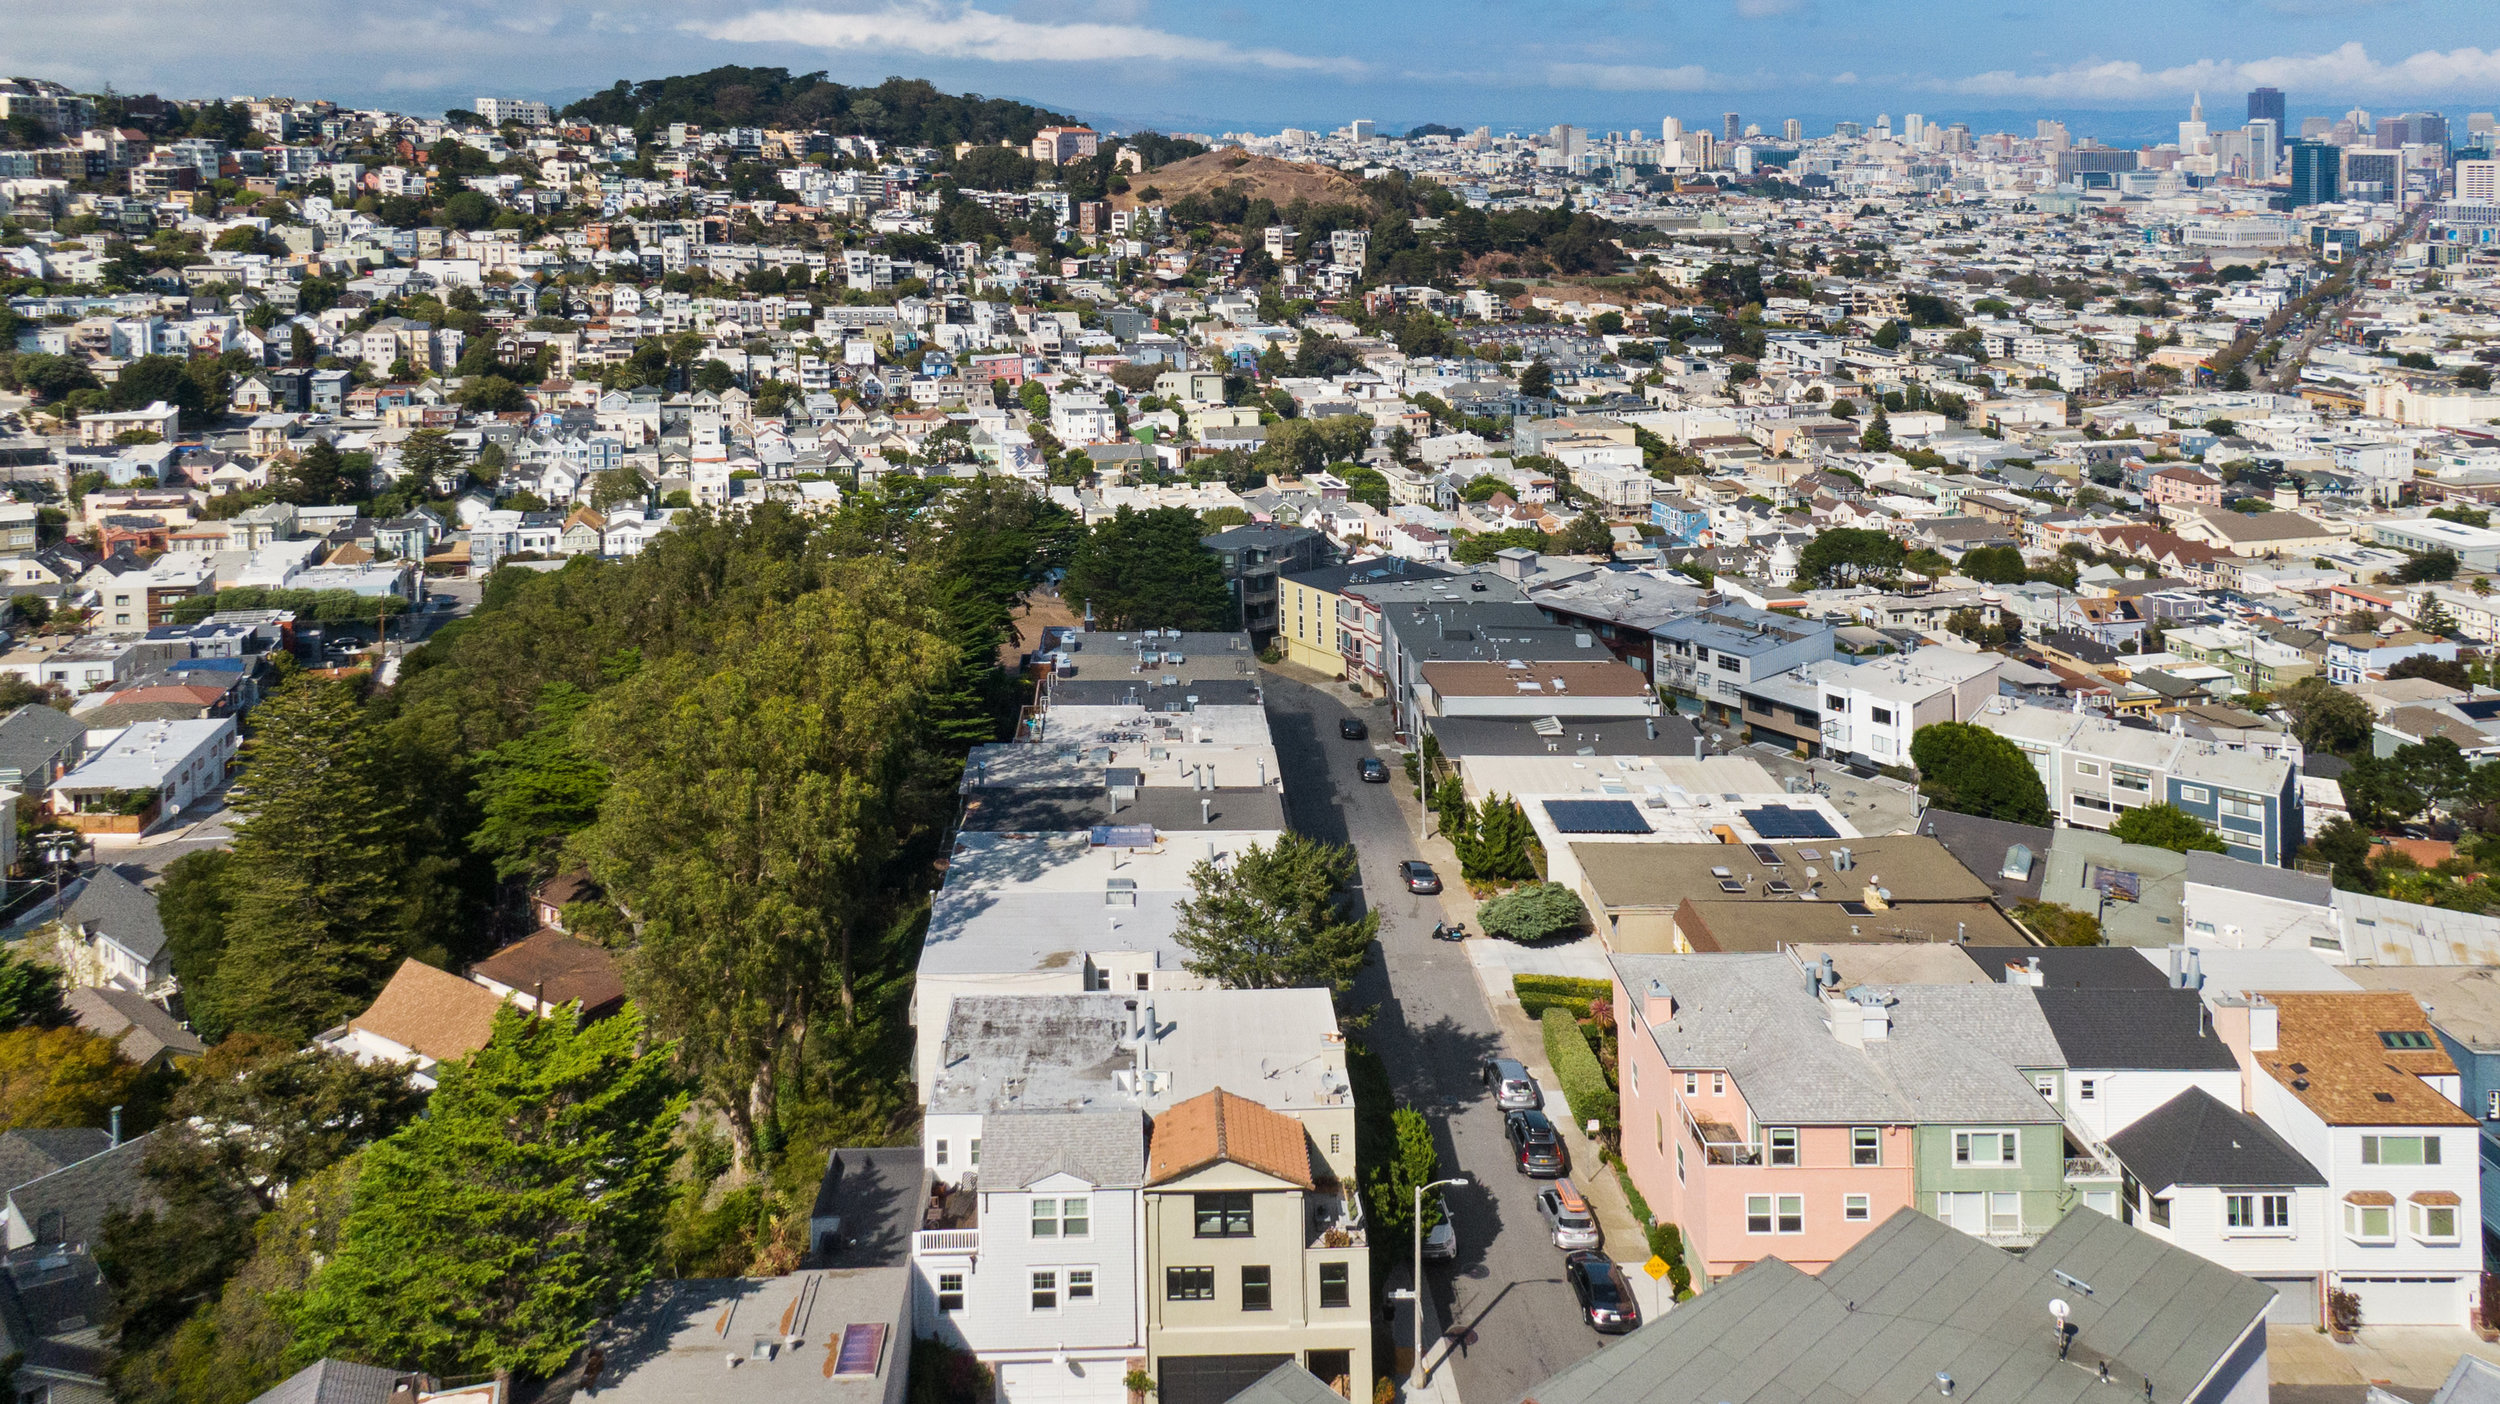 Property Photo: Aerial view of 25 Grand View Ave, showing the proximity to Kite Hill